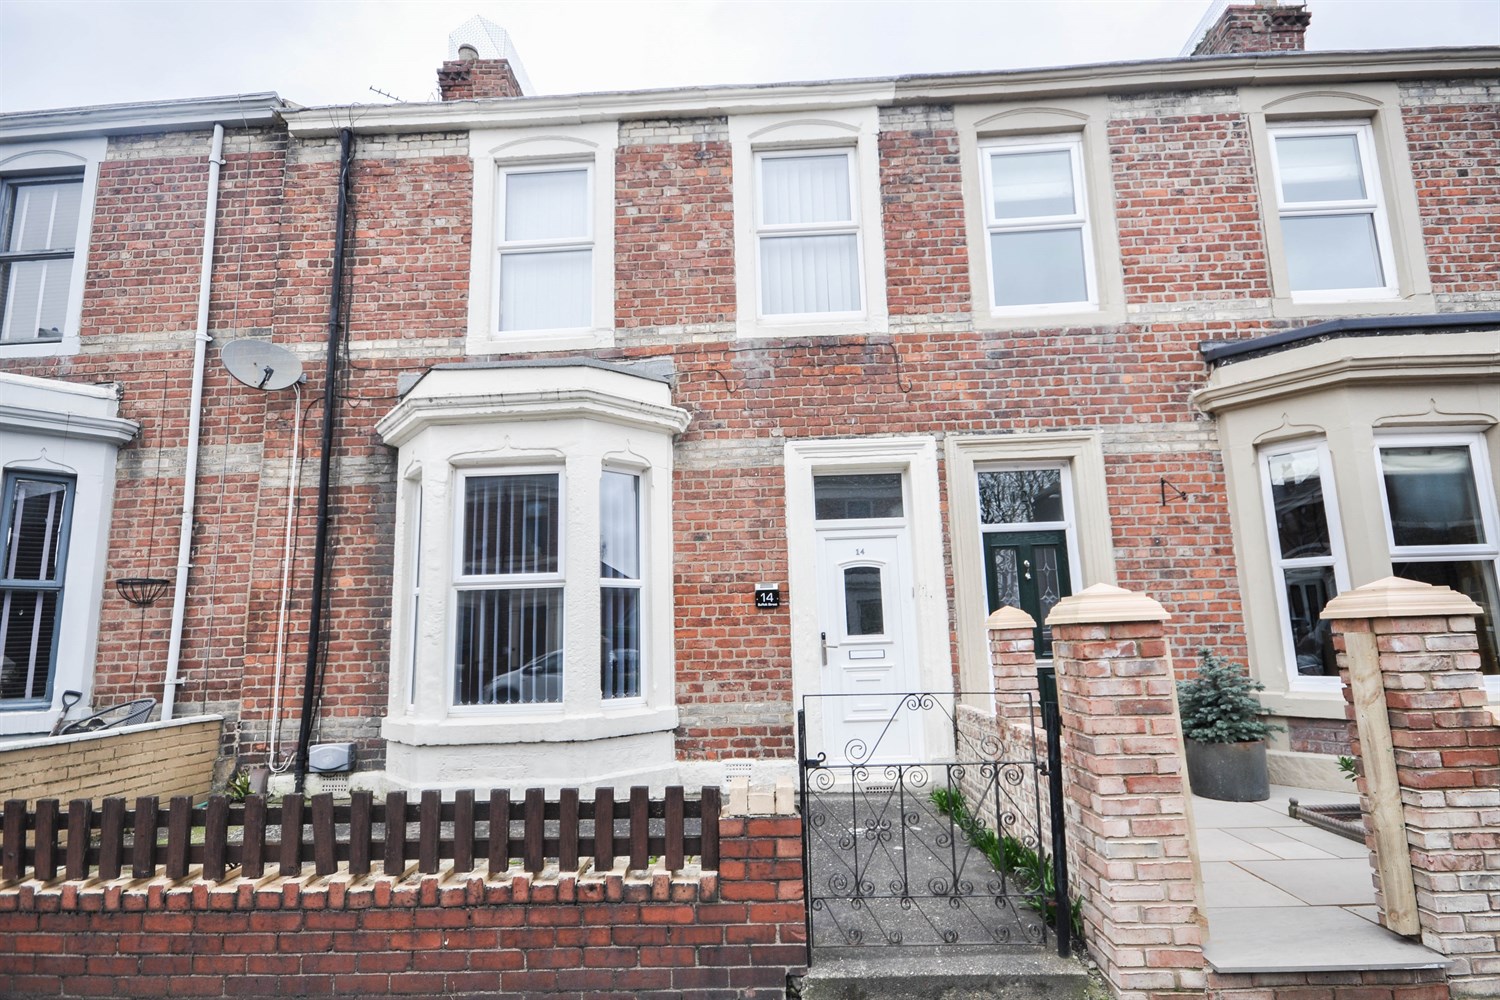 3 bed house for sale in Suffolk Street, Jarrow - Property Image 1